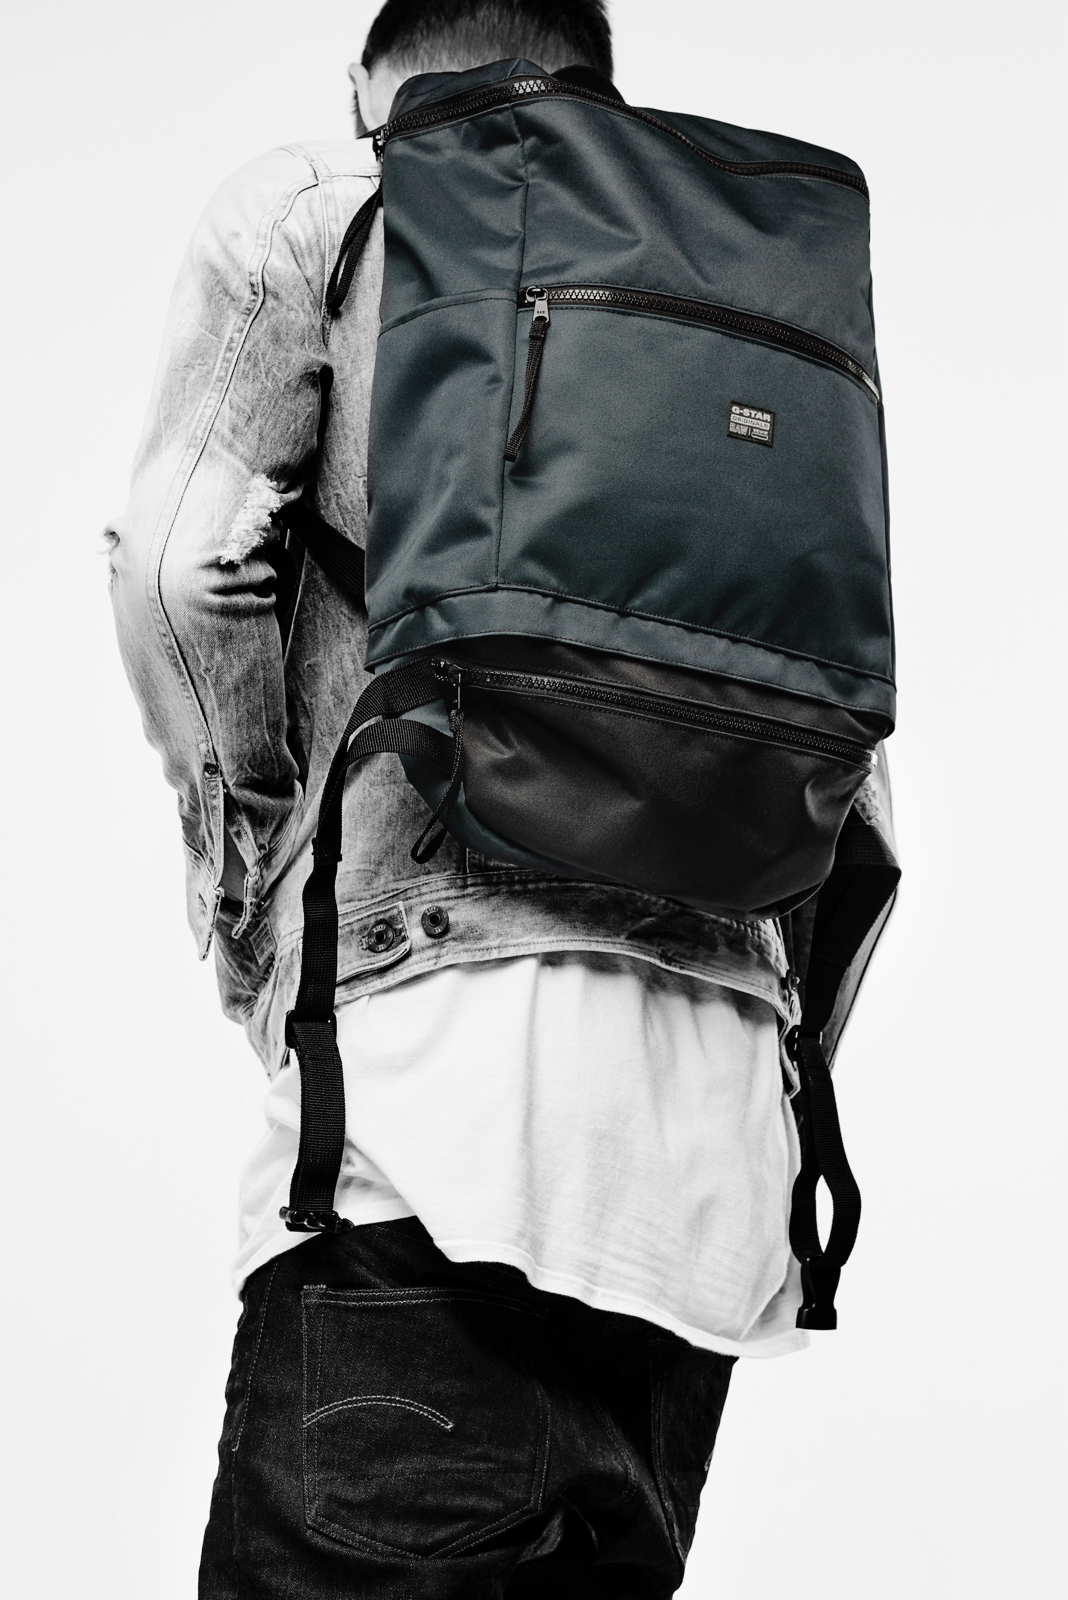 G-STAR RAW UNVEILS 2 IN 1 BACKPACK